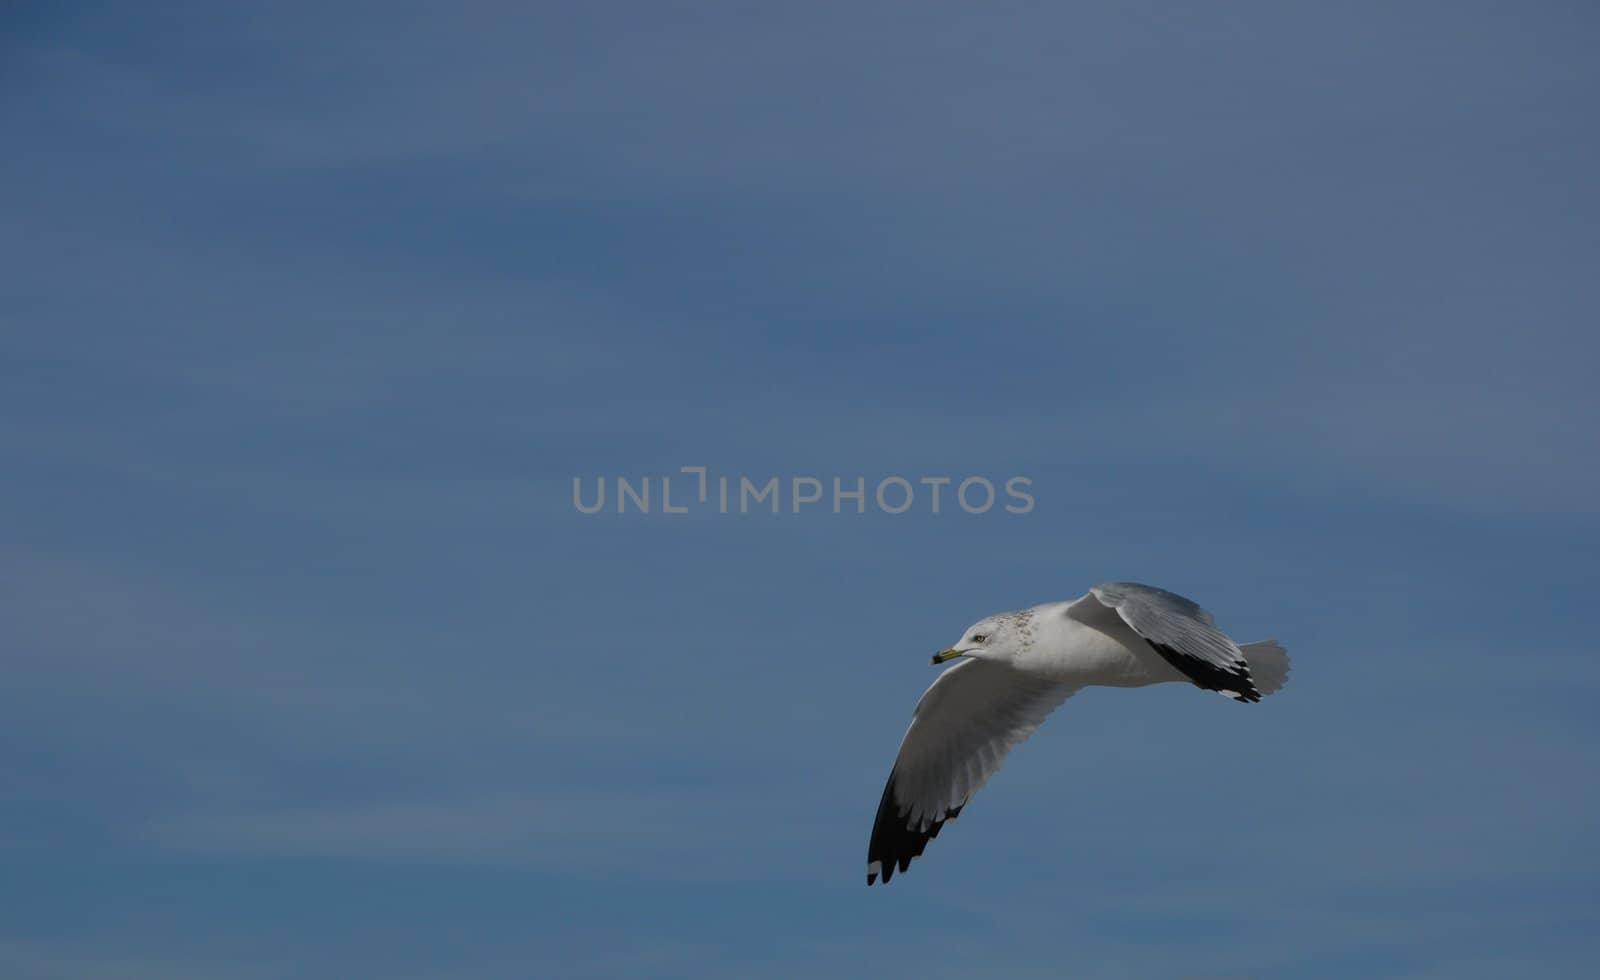 A seagull flying in the air during a bright day